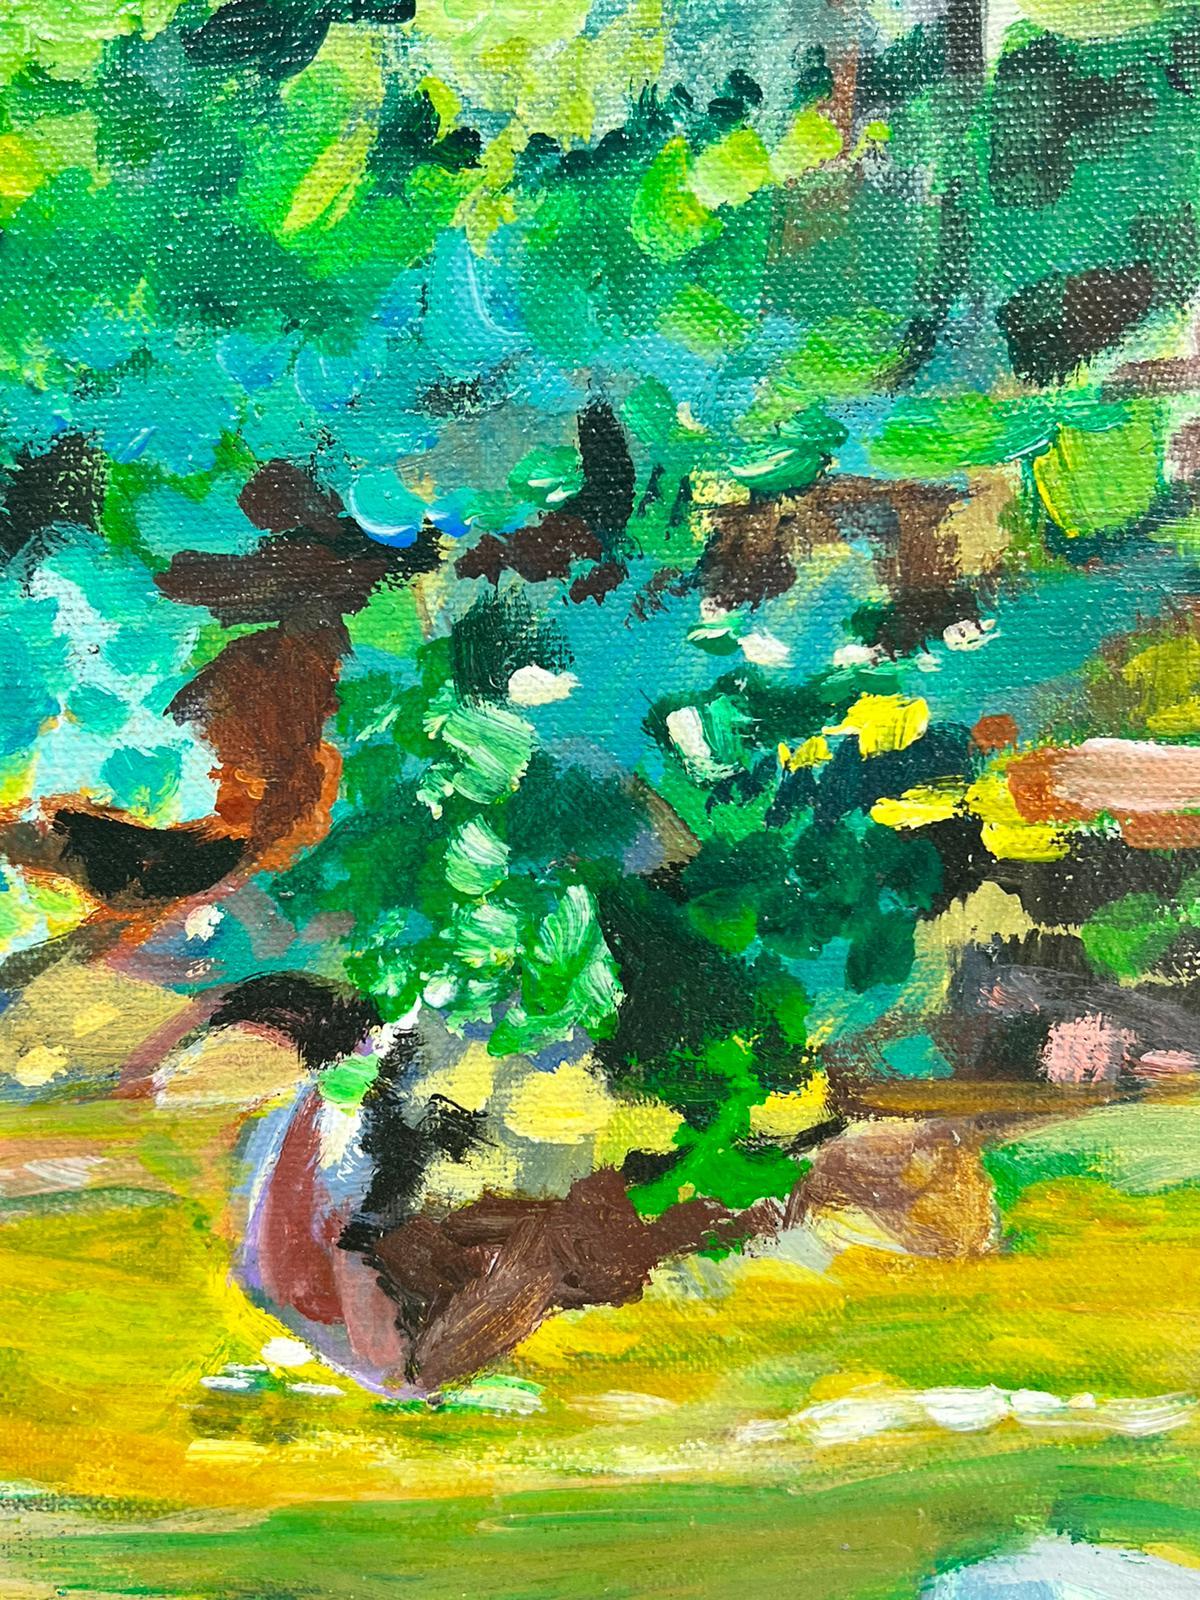 Green landscape
Huguette Ginet-Lasnier (French 1927-2020)
inscribed verso
framed
signed
oil painting on canvas
framed: 13 x 11 inches
canvas: 11 x 9 inches.
All the paintings we have for sale by this artist have come from the artists estate in